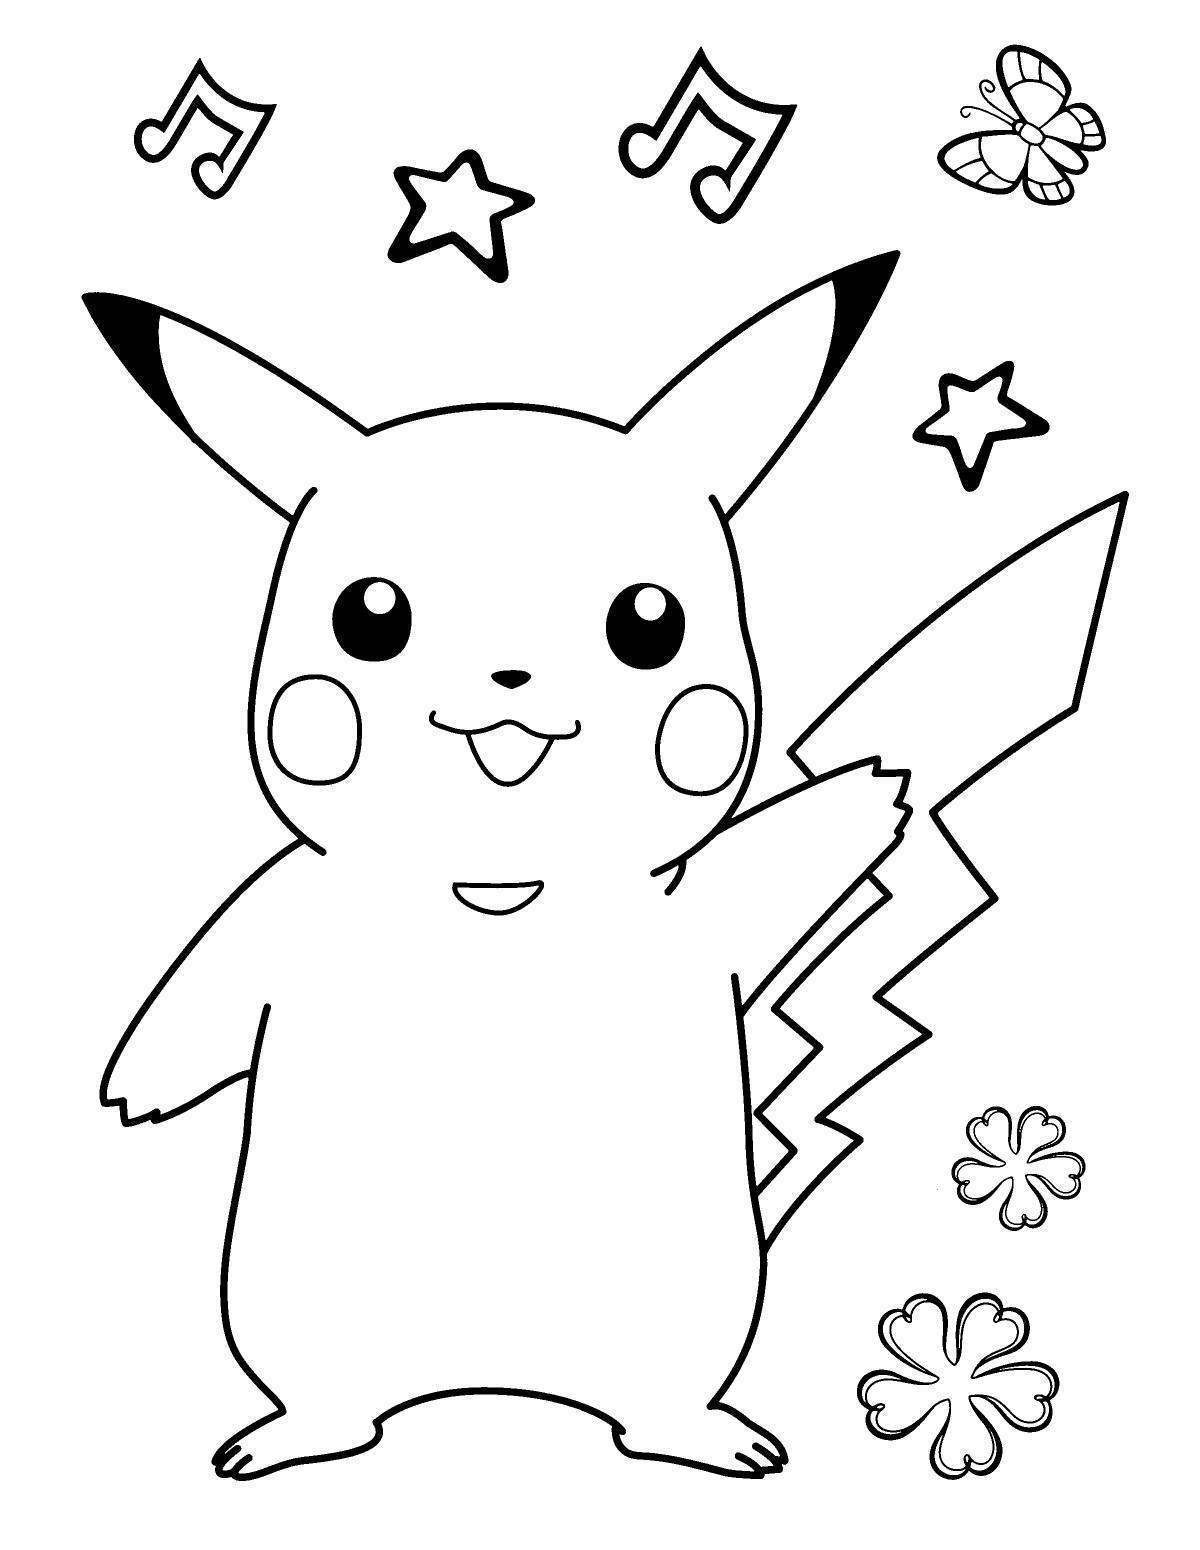 Exciting pikachu coloring book for girls